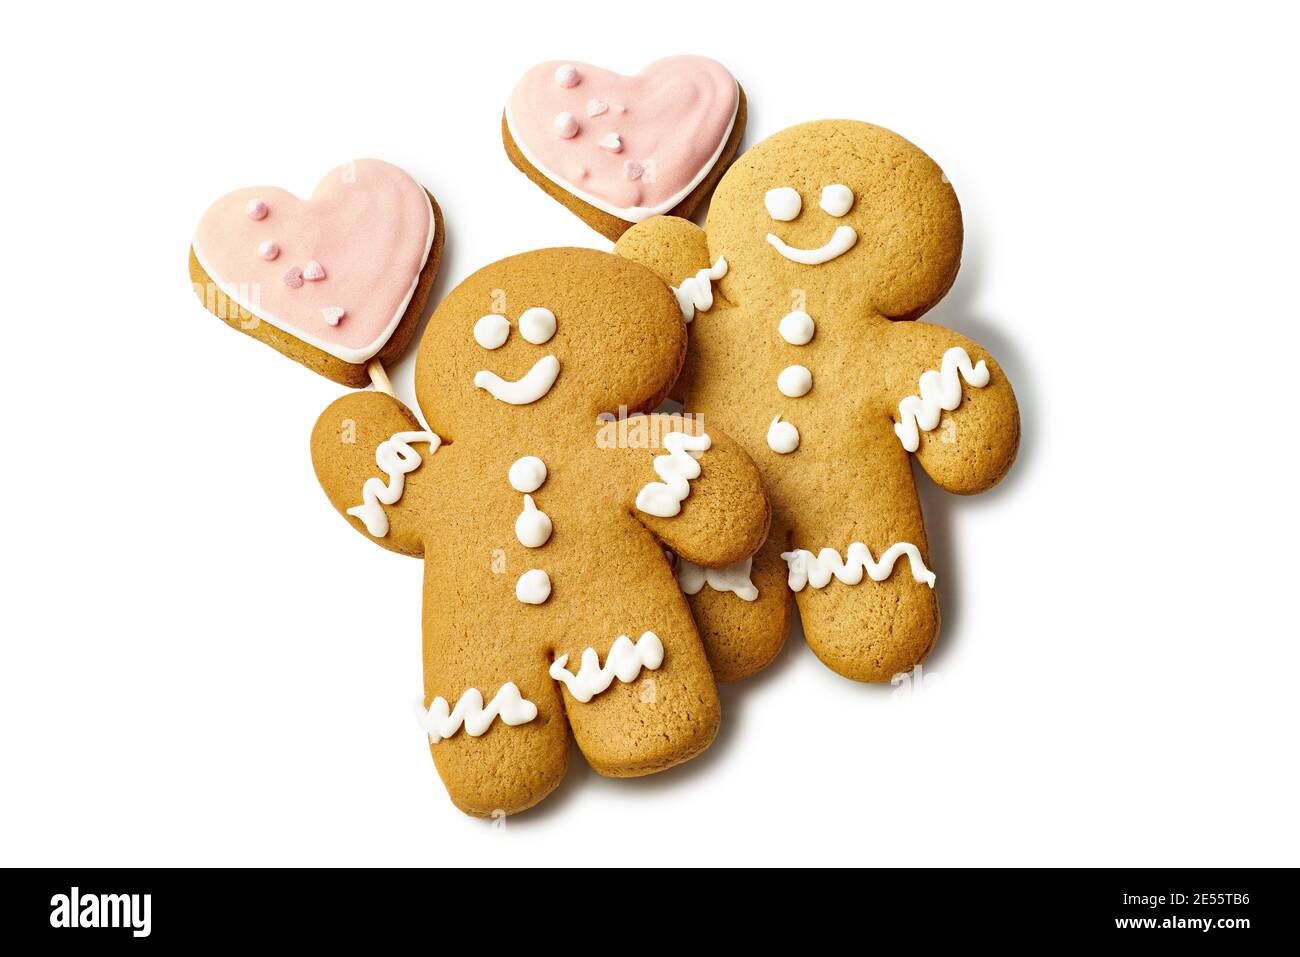 Gingerbread cookies shaped as man and heart on white Stock Photo